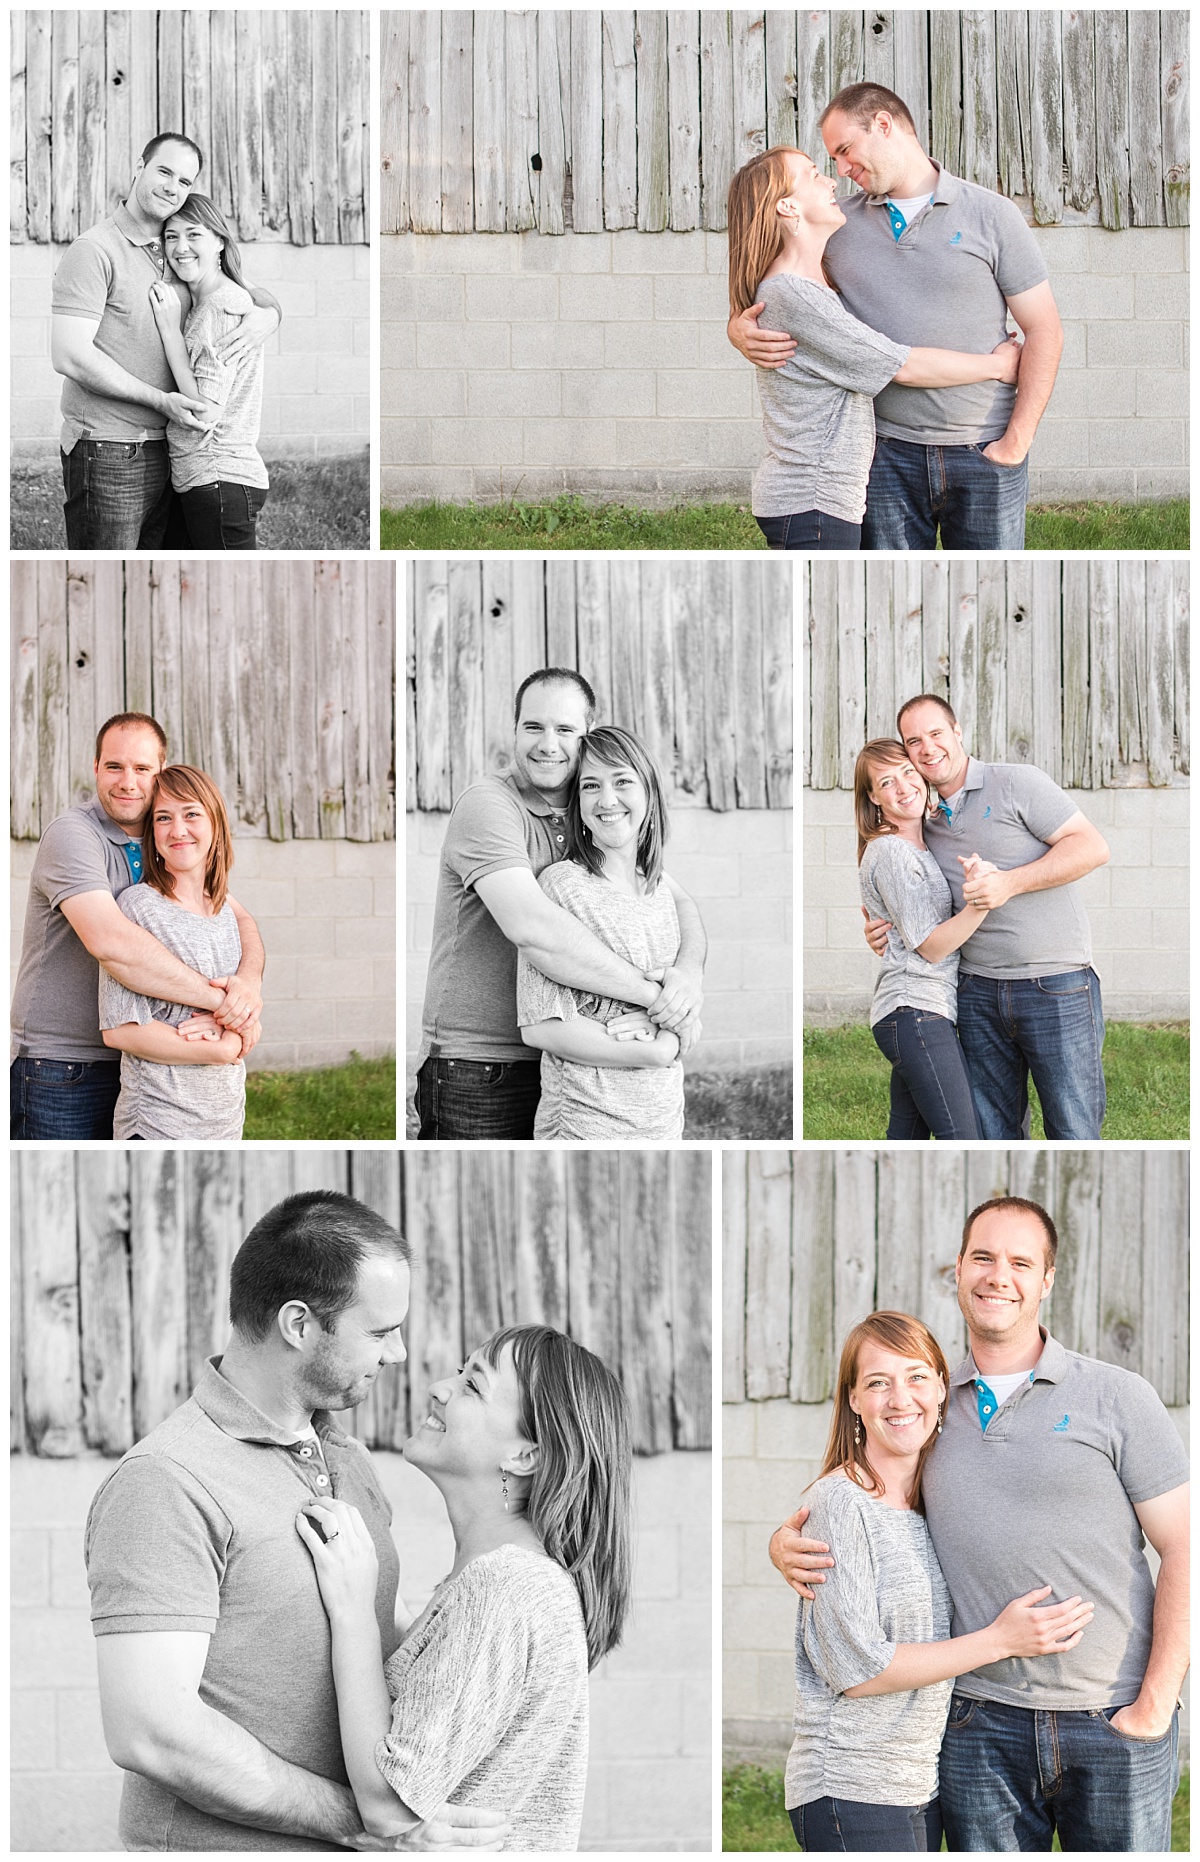 Samantha Ludlow Photography, my posing style, family portraits, couples, anniversary session, Syracuse photographer, Syracuse photography, Syracuse family photographer, Syracuse newborn photographer, Syracuse couples photographer, CNY photographer